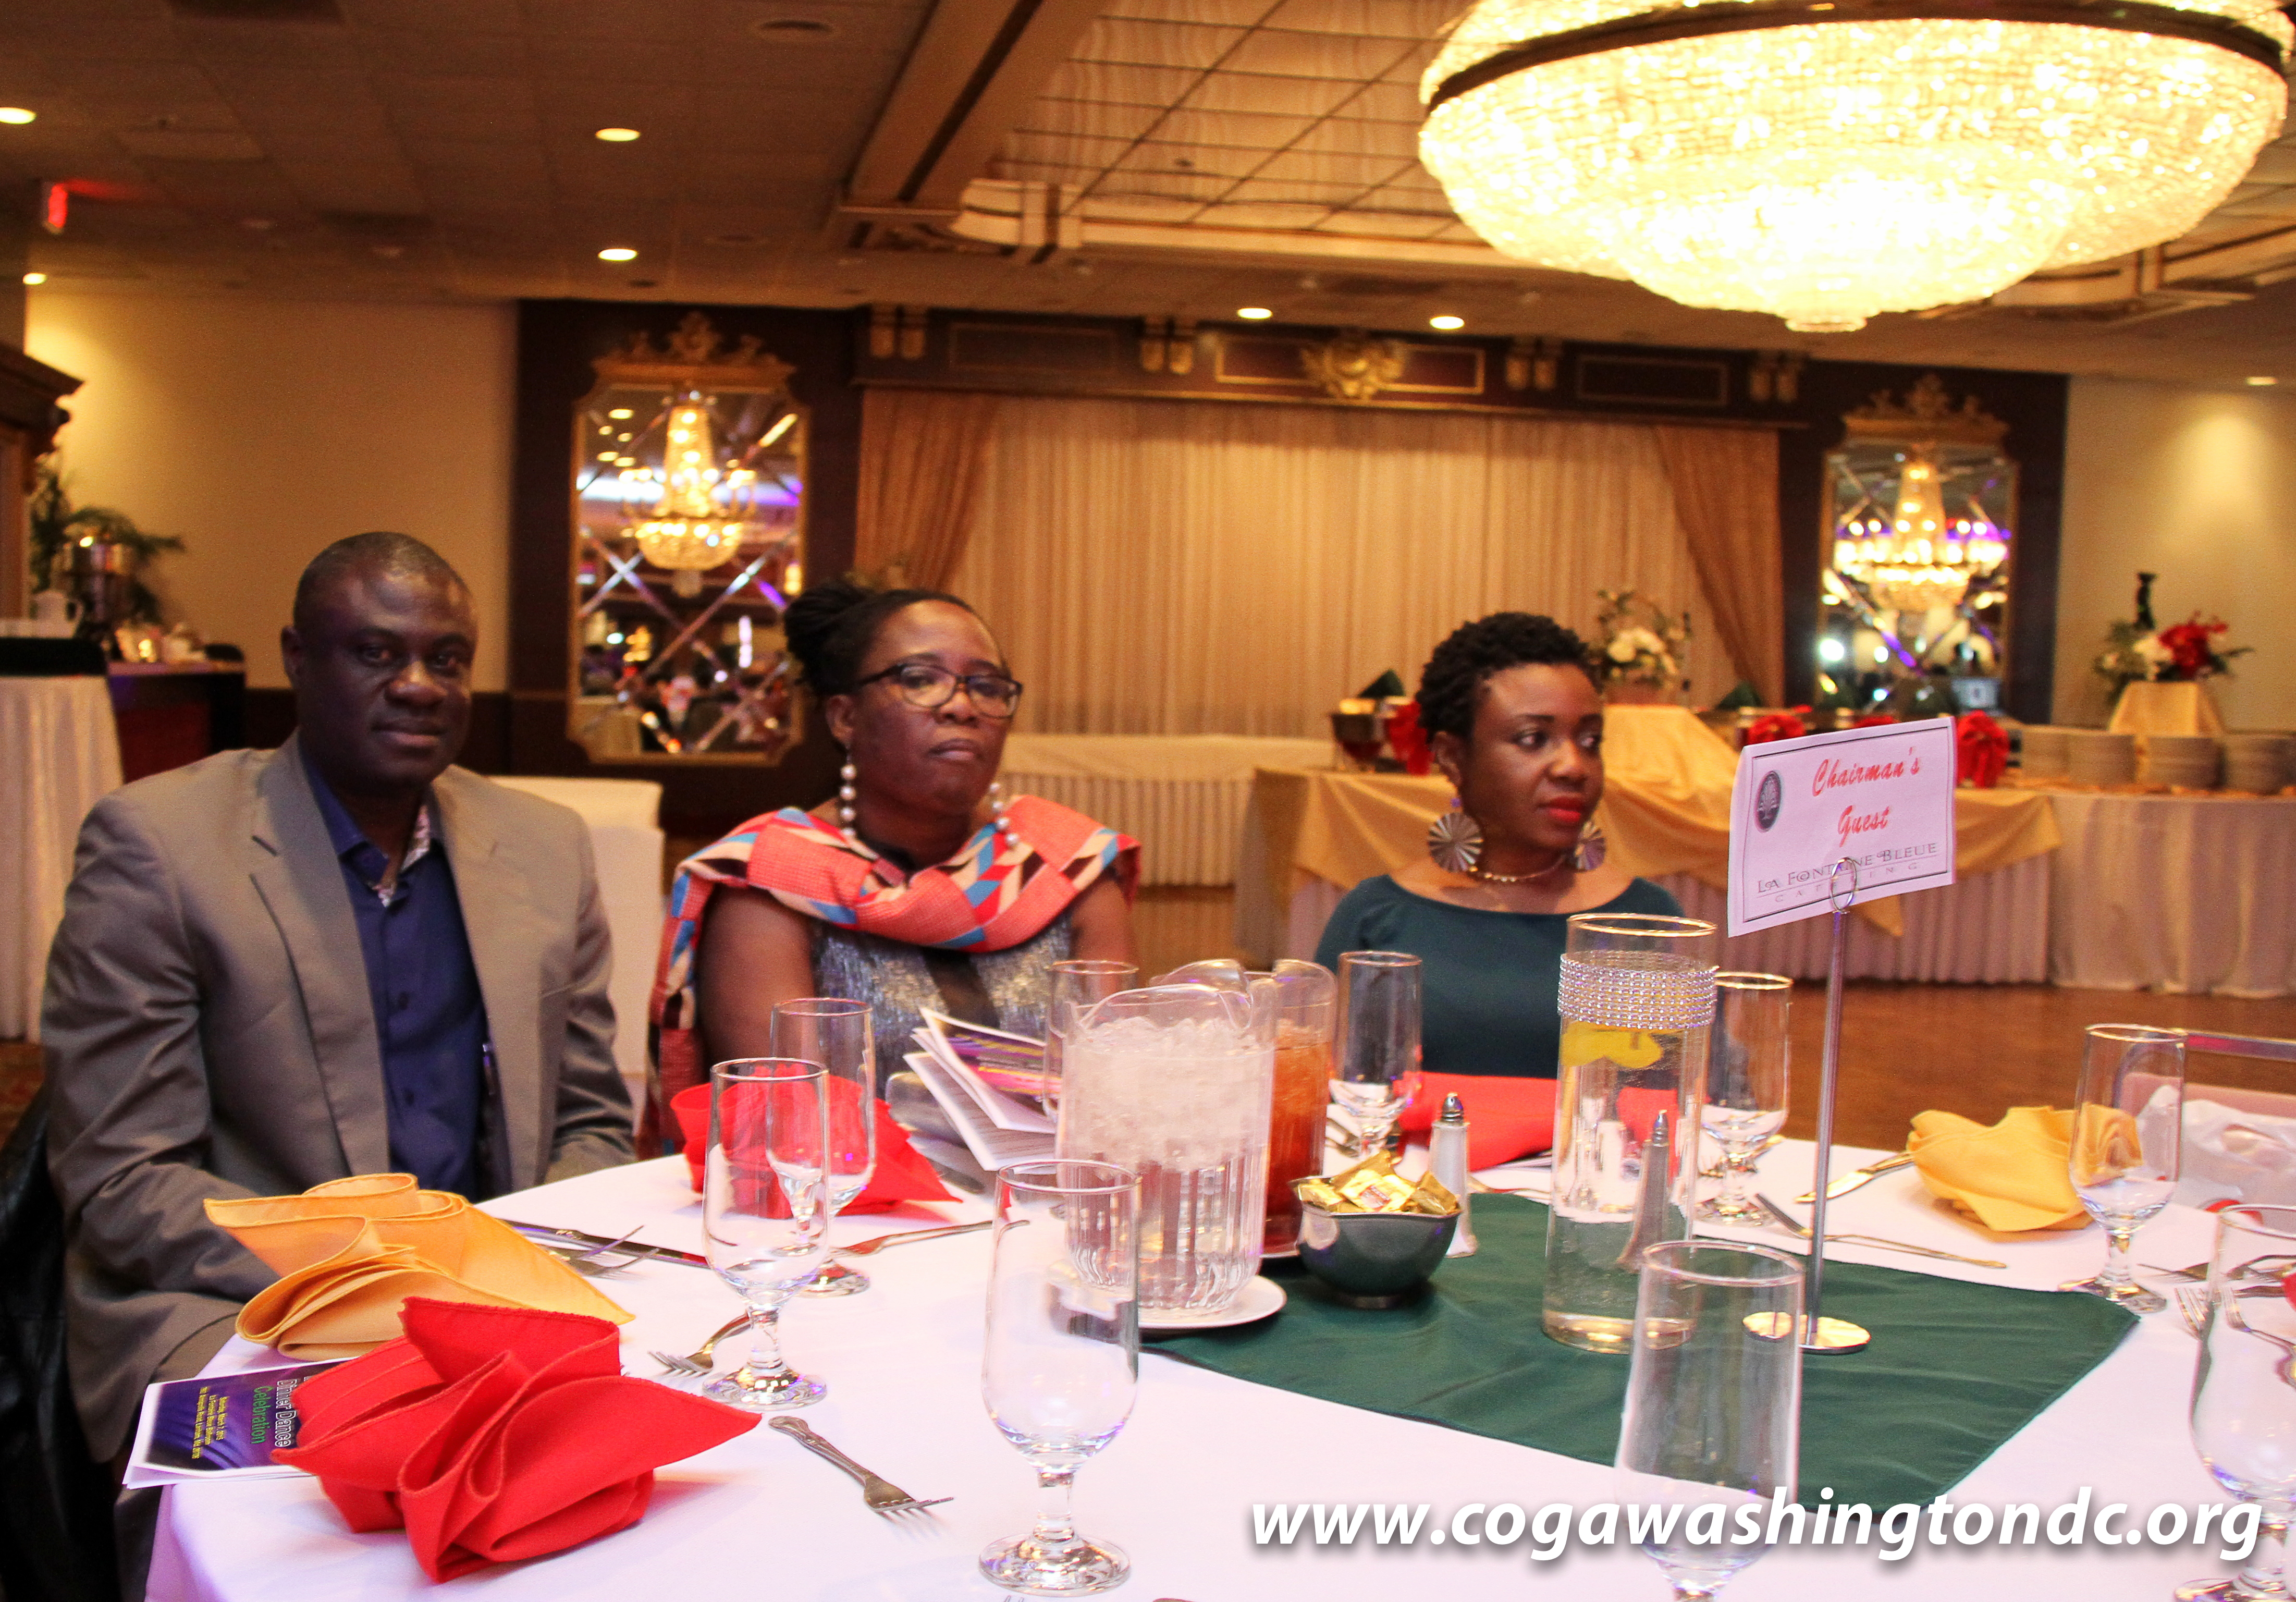 COGA Hosts the 58th Independence Anniversary Dinner Dance